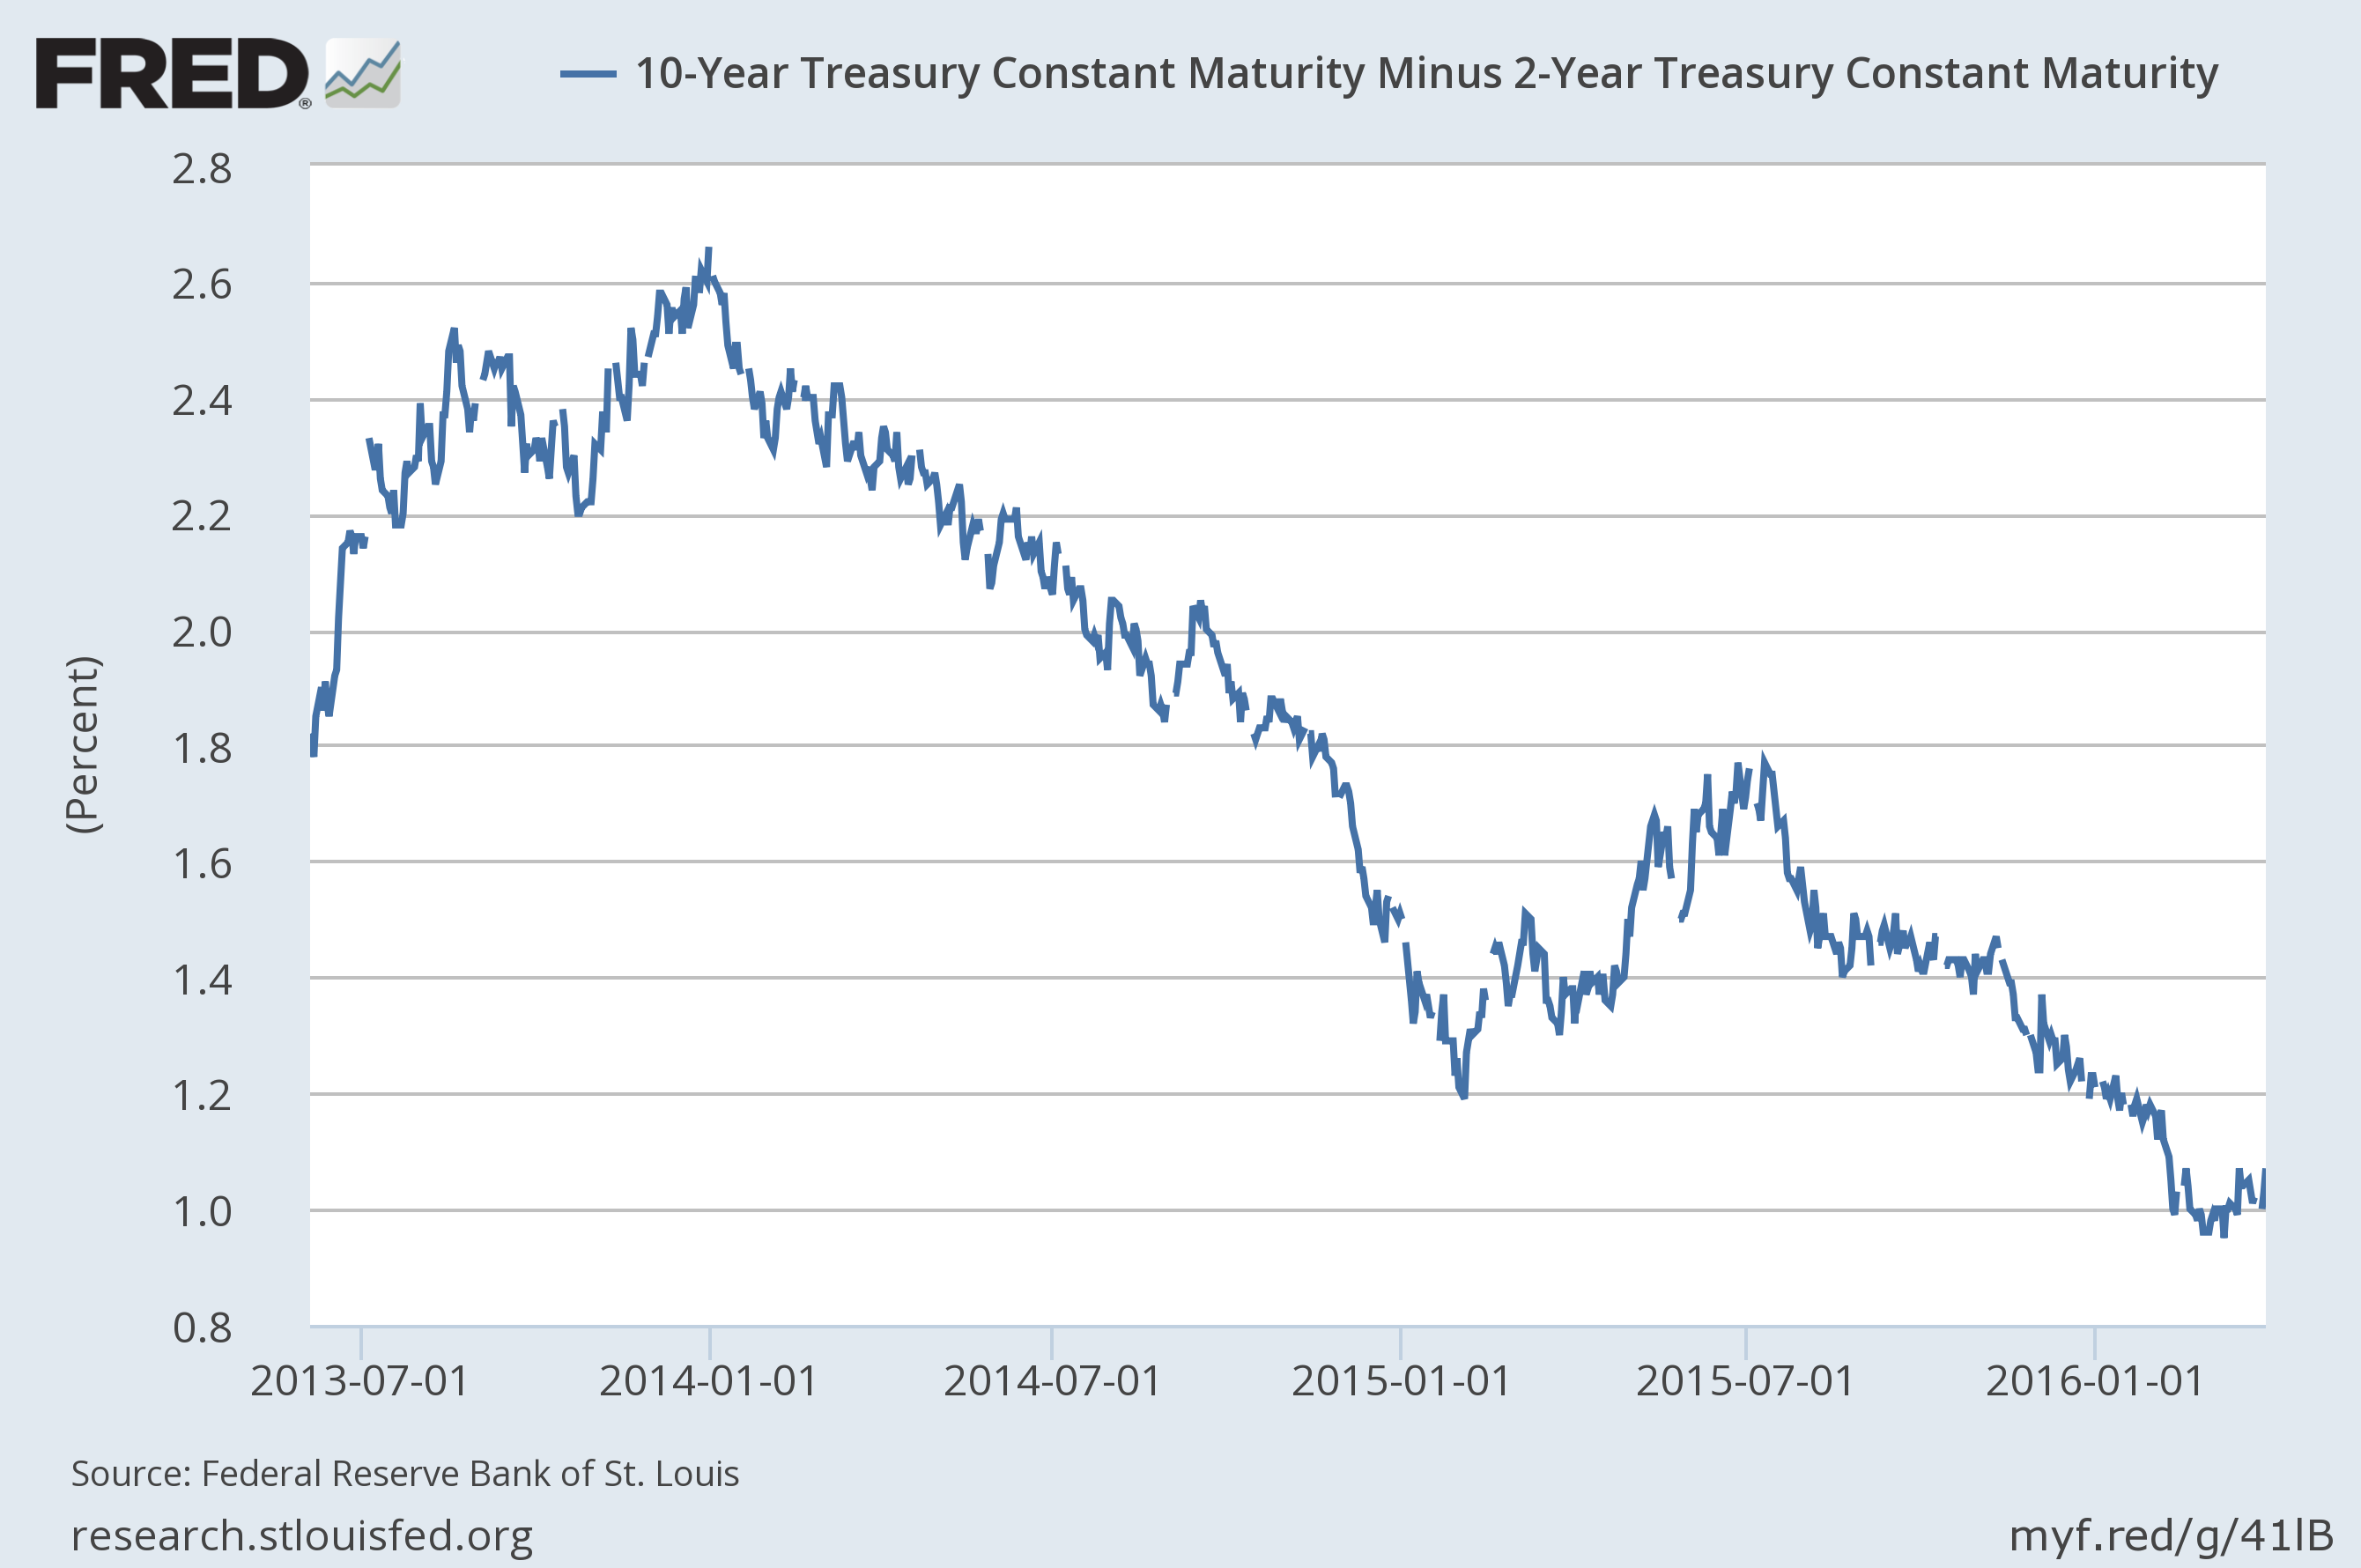 Yield Curve Has Stopped Flattening